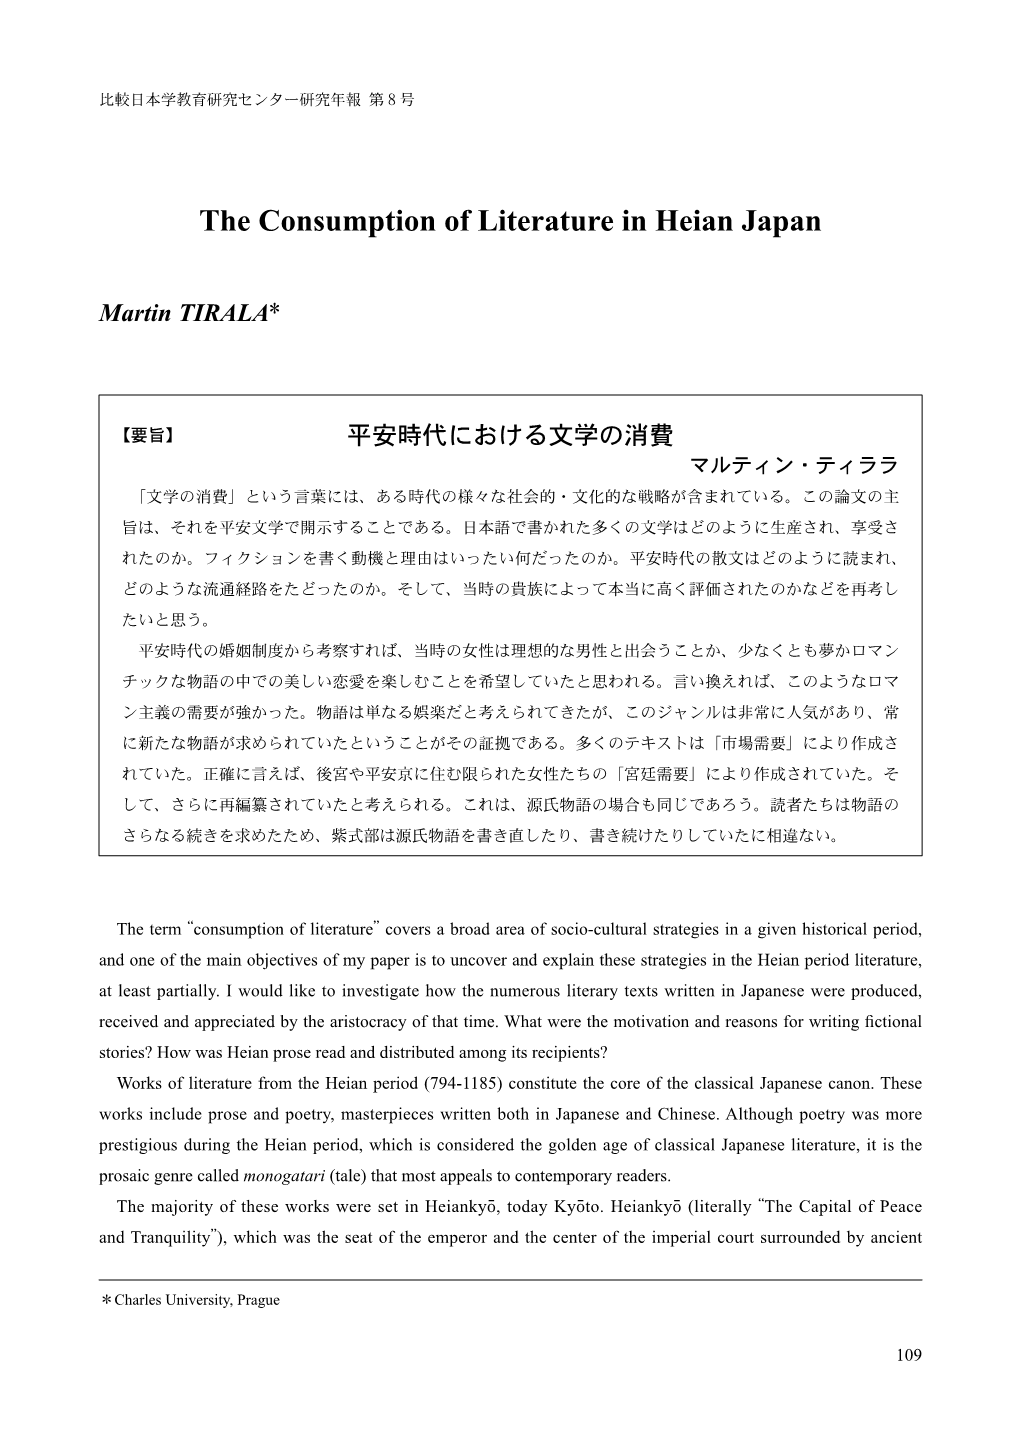 The Consumption of Literature in Heian Japan